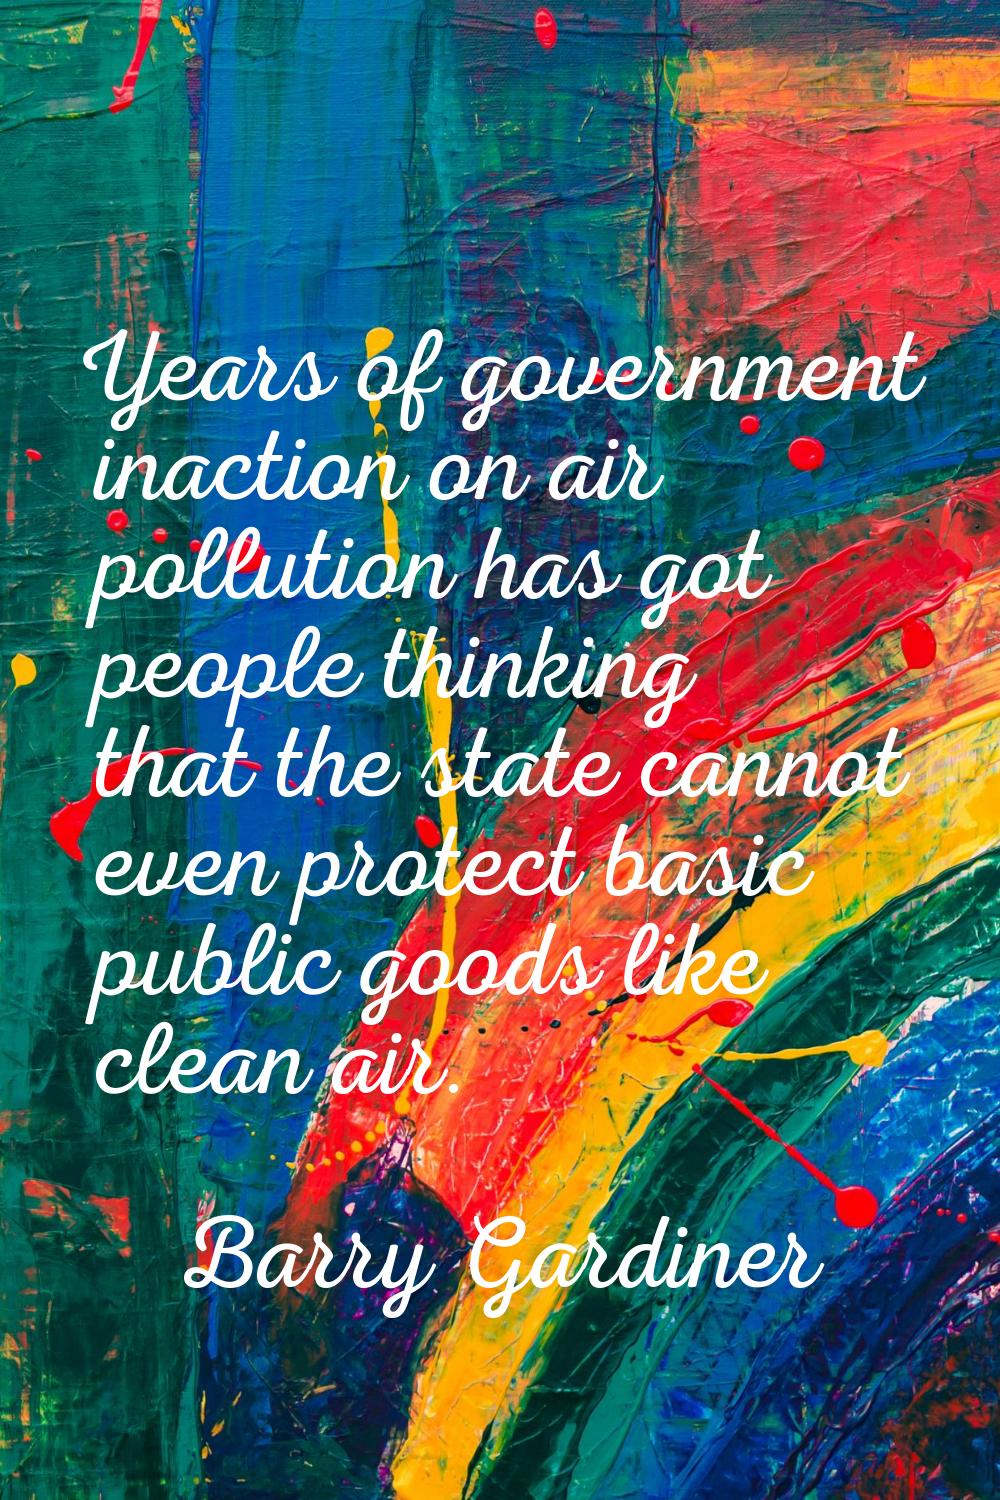 Years of government inaction on air pollution has got people thinking that the state cannot even pr